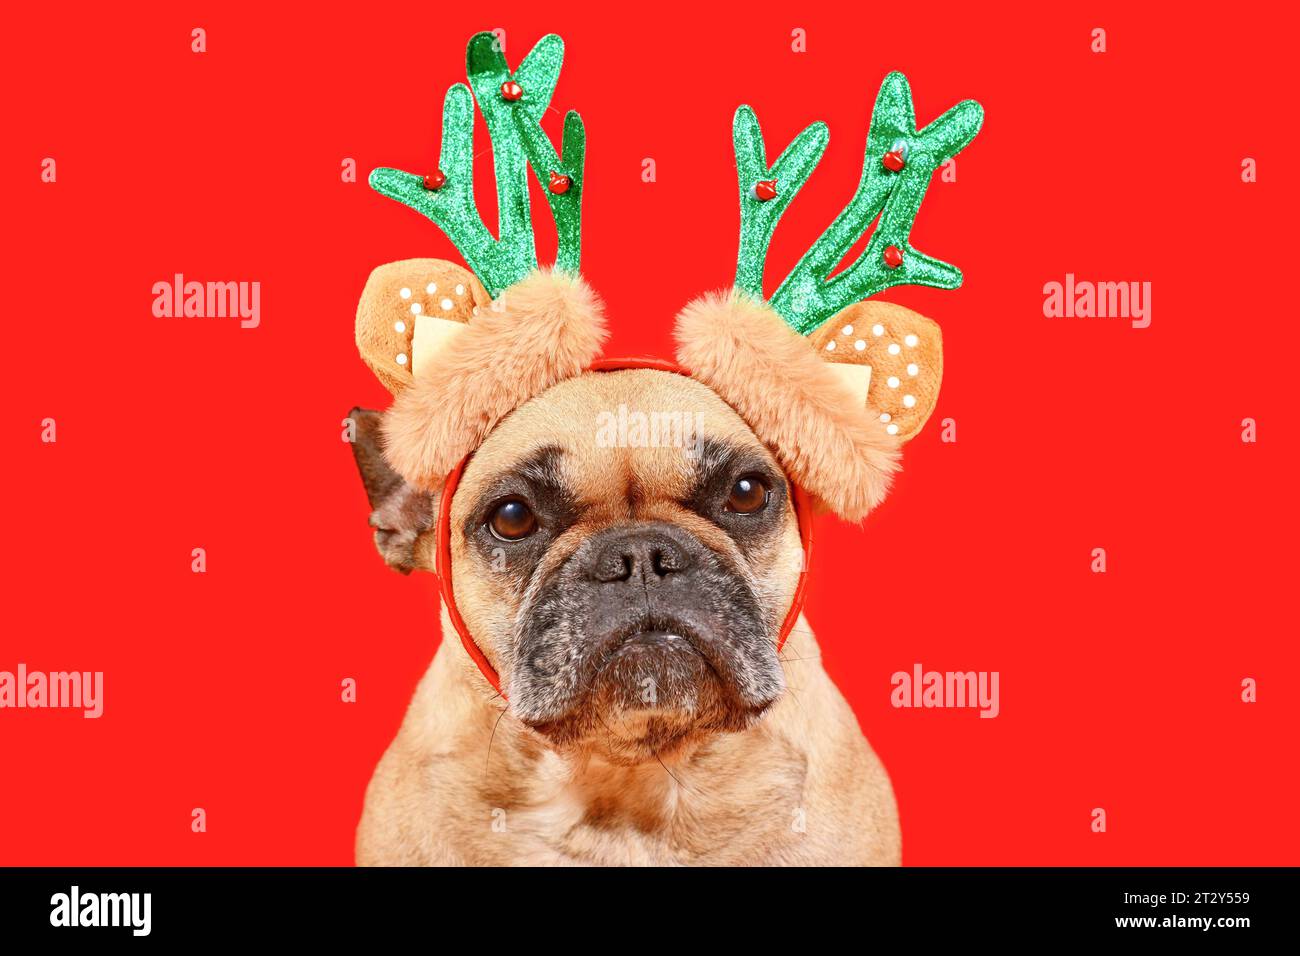 Cute French Bulldog dog with Christmas reindeer antler costume headband on red background Stock Photo